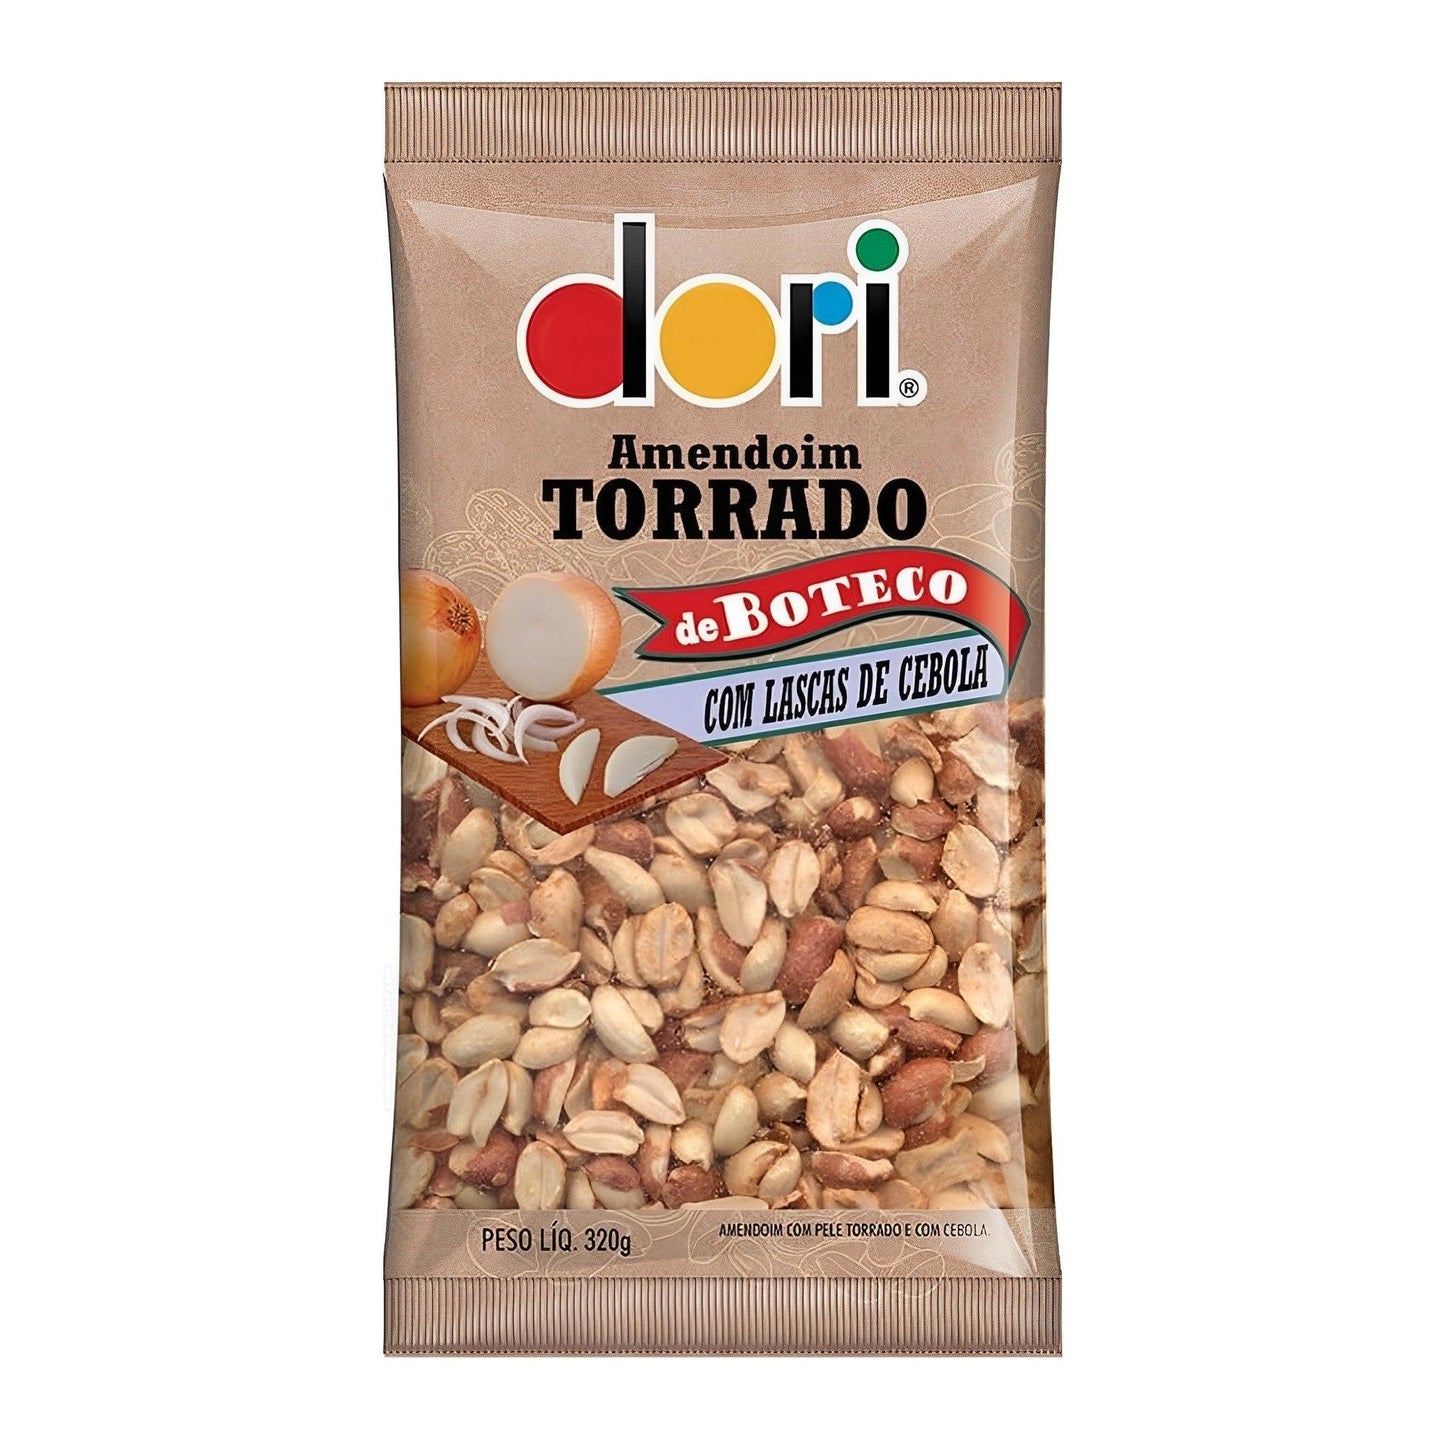 Dori Roasted Peanuts With Onion Chips 11.28 oz. (Pack of 4) - Brazilian Shop